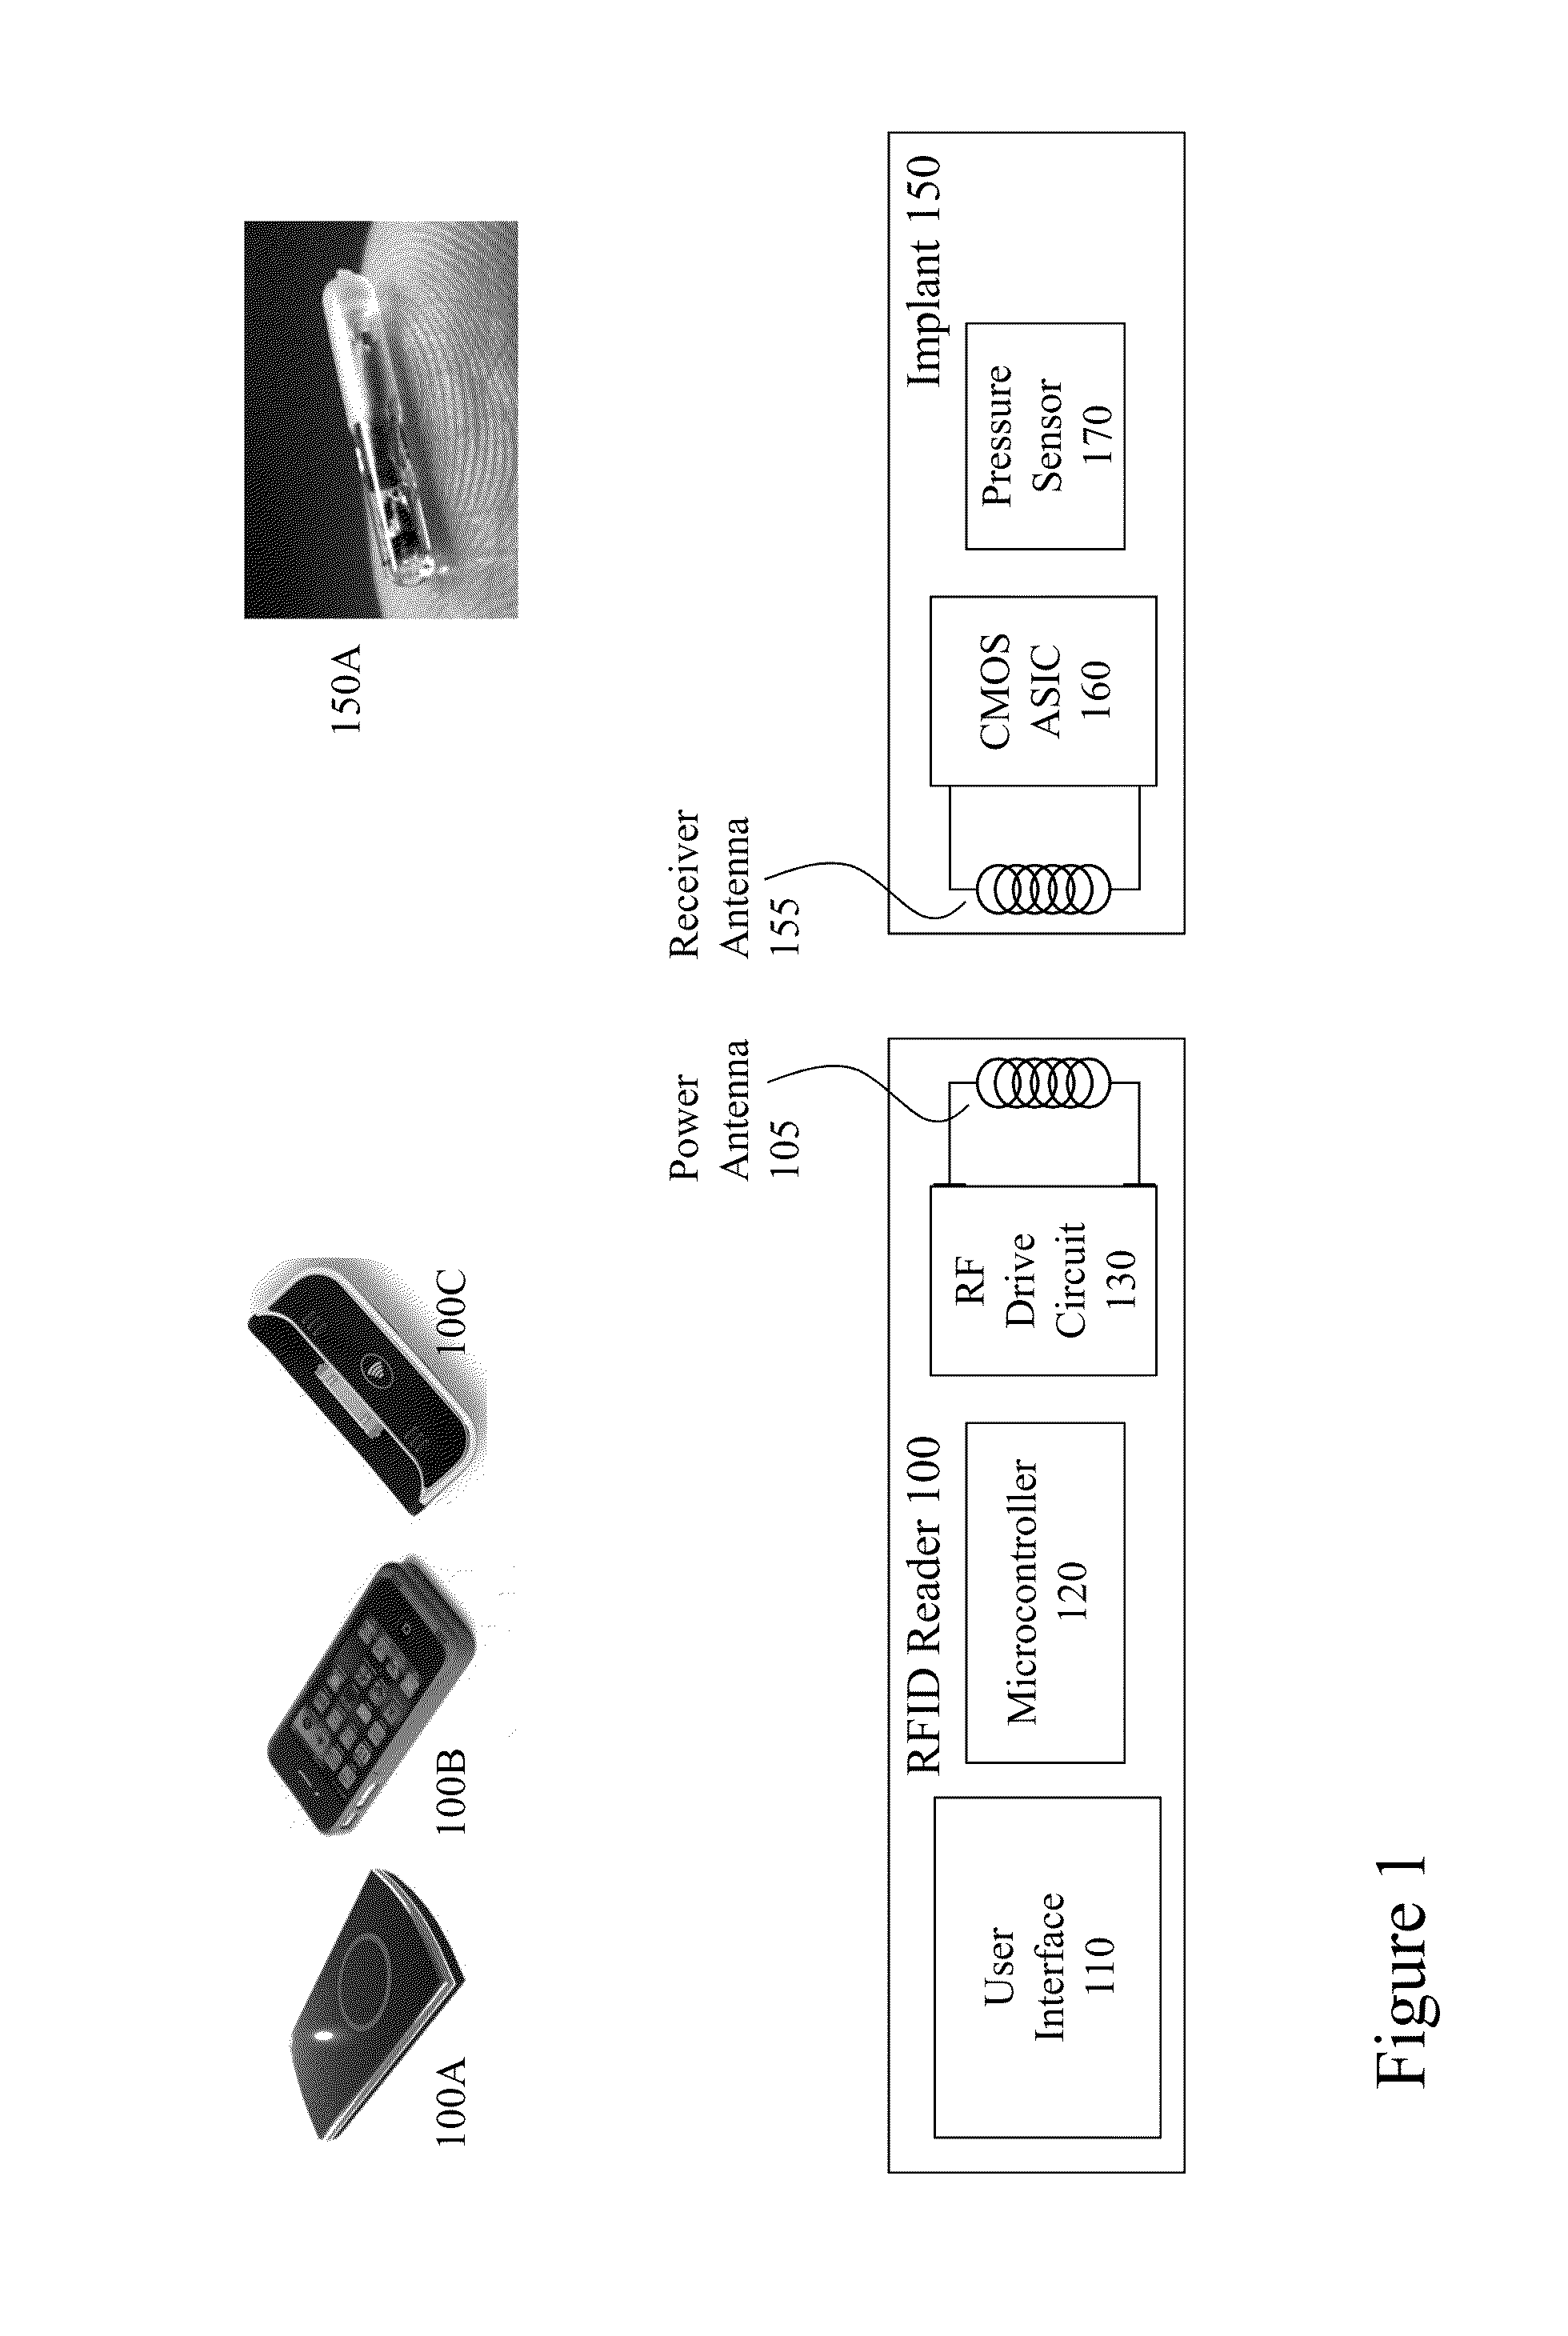 Methods and systems relating to biological systems with embedded MEMS sensors